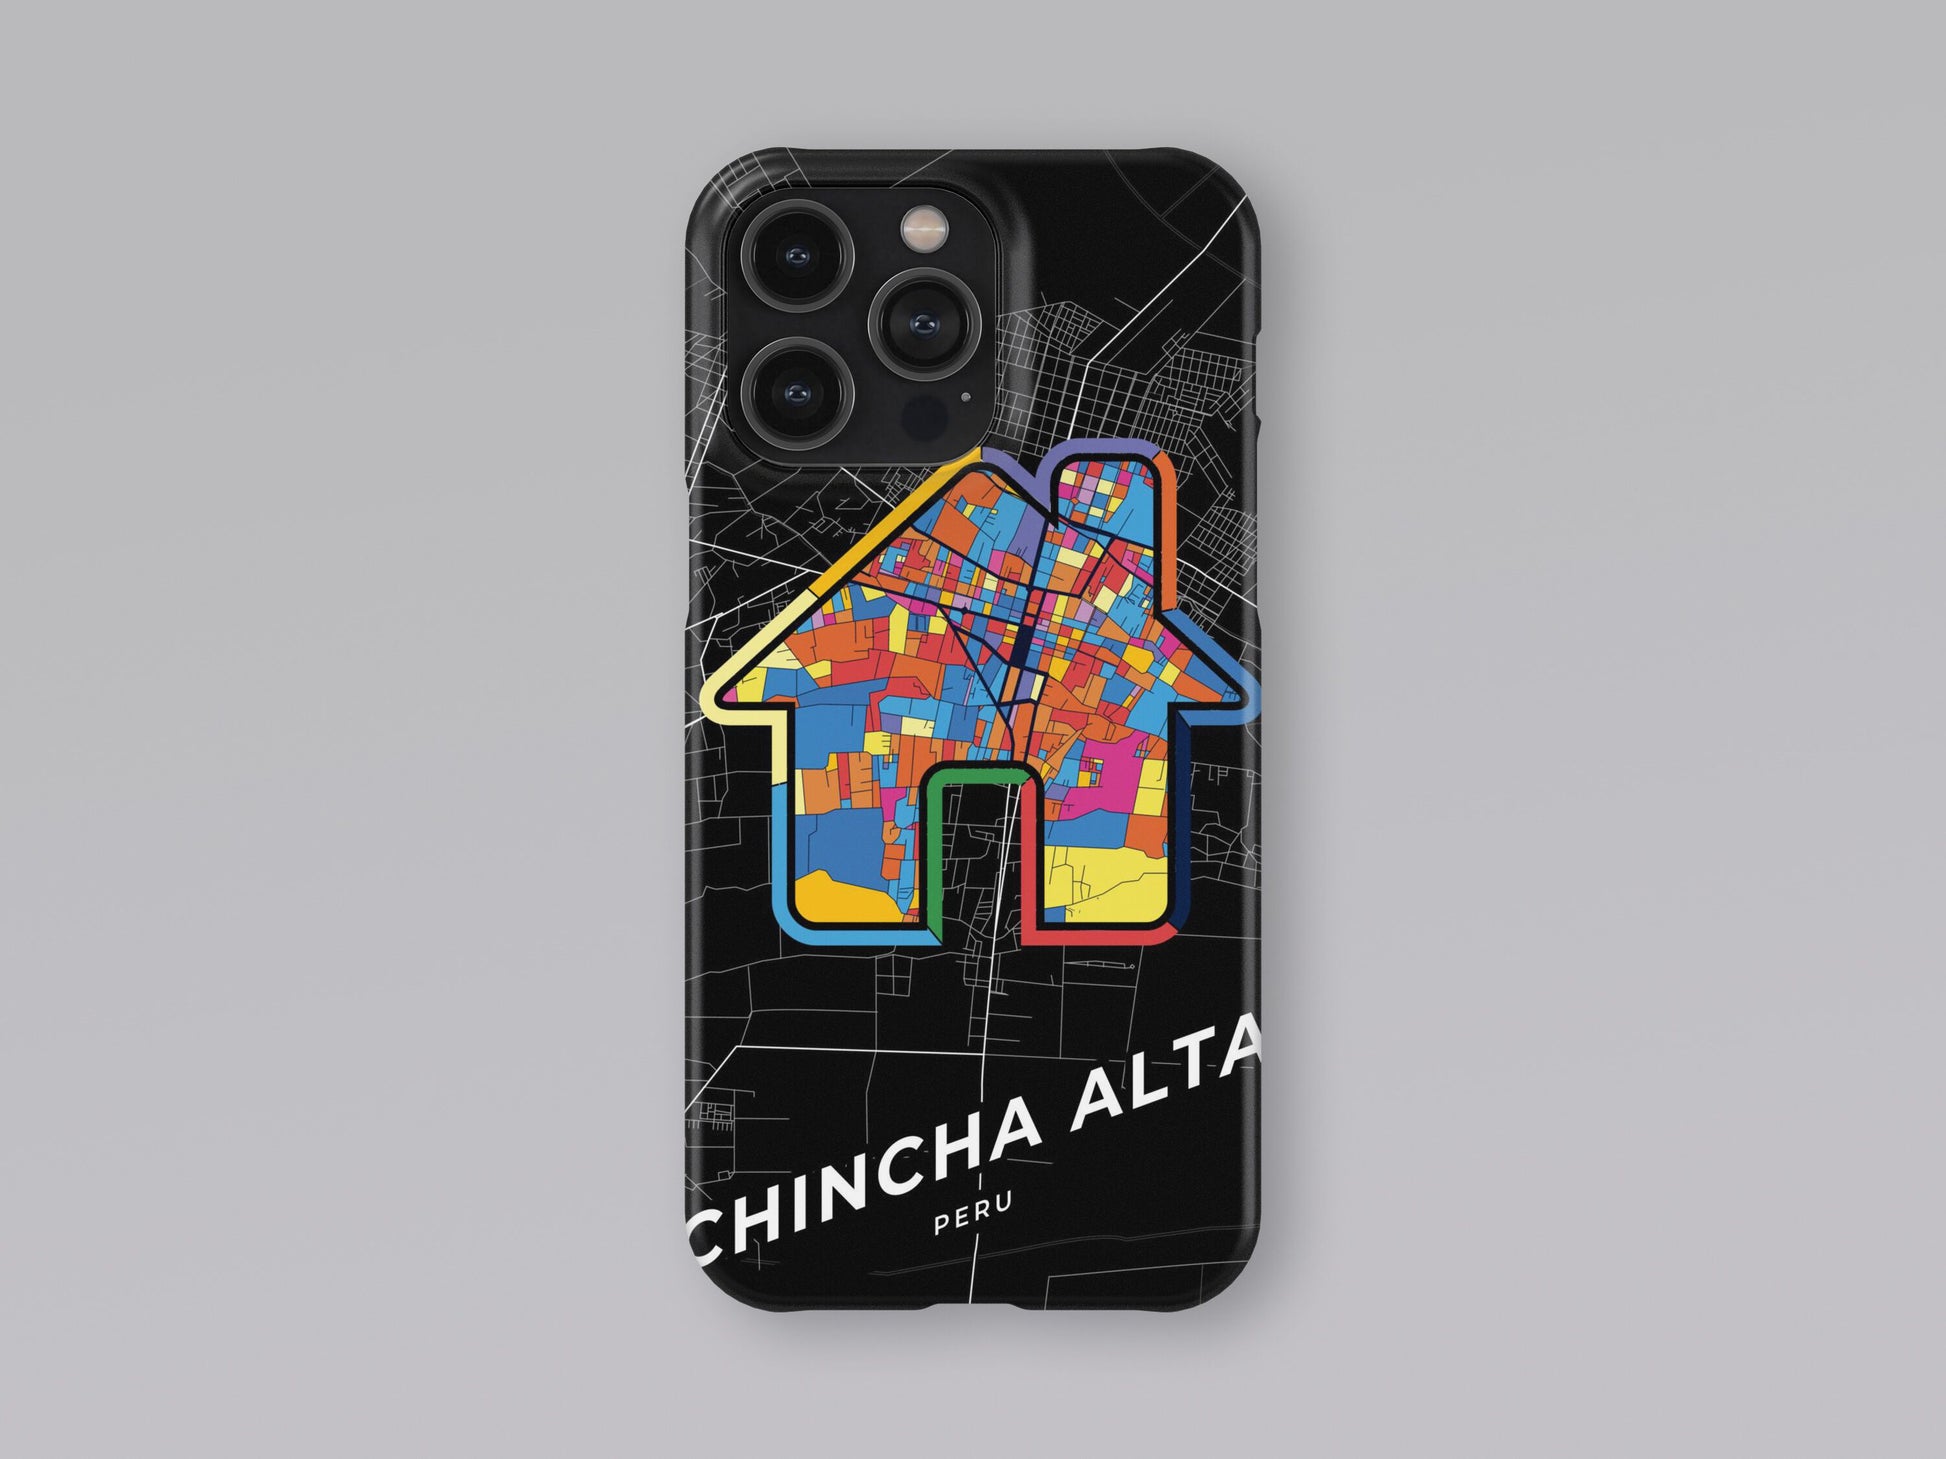 Chincha Alta Peru slim phone case with colorful icon. Birthday, wedding or housewarming gift. Couple match cases. 3